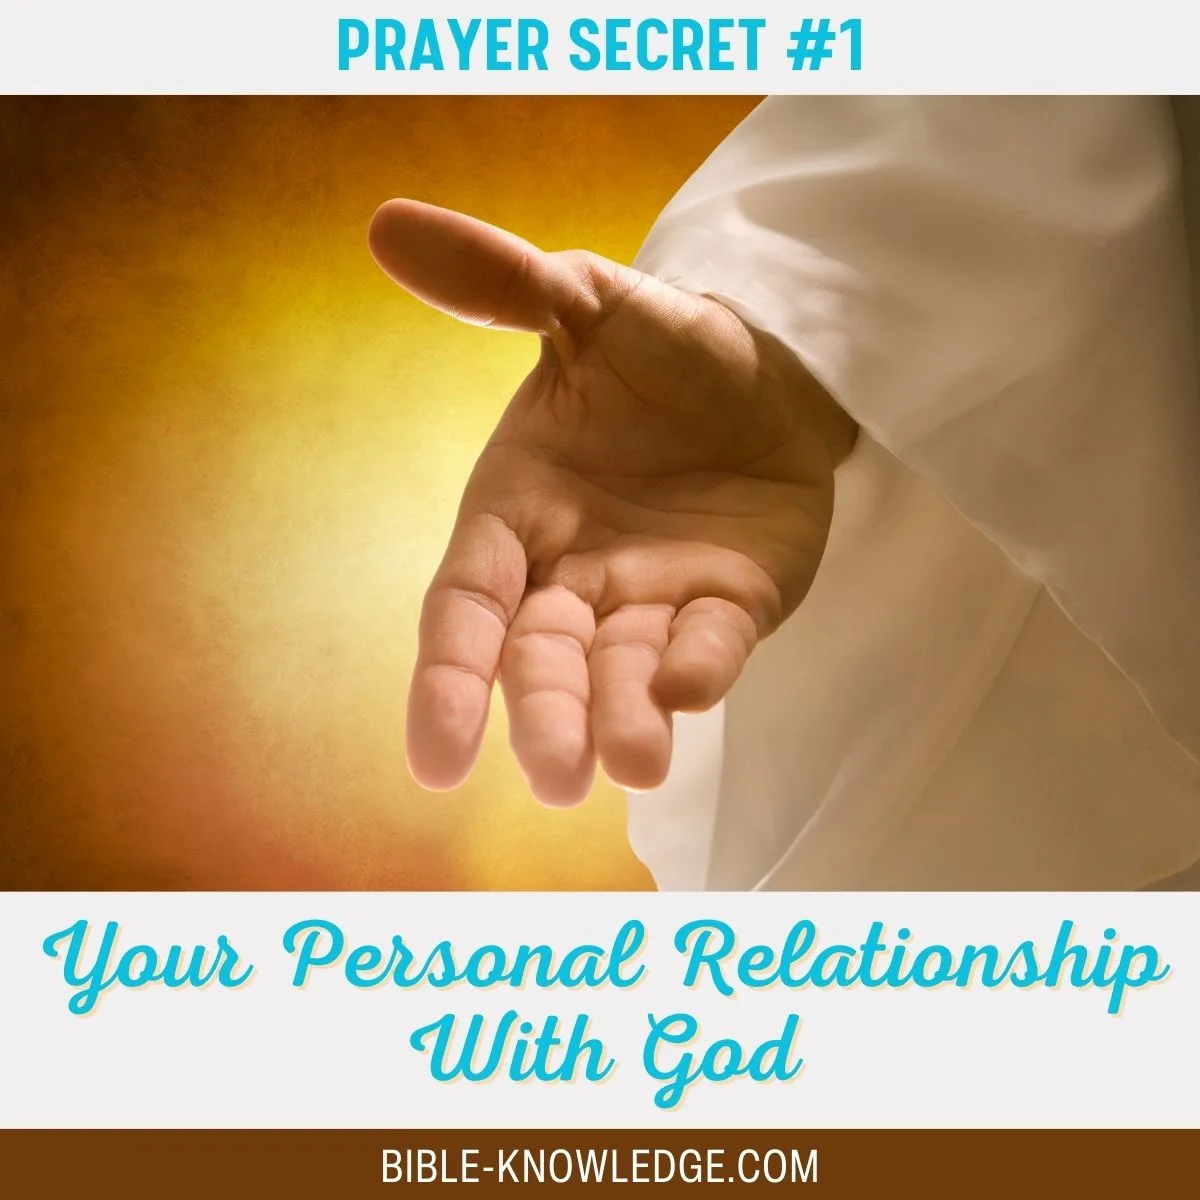 Prayer Secret #1 - Your Personal Relationship With God